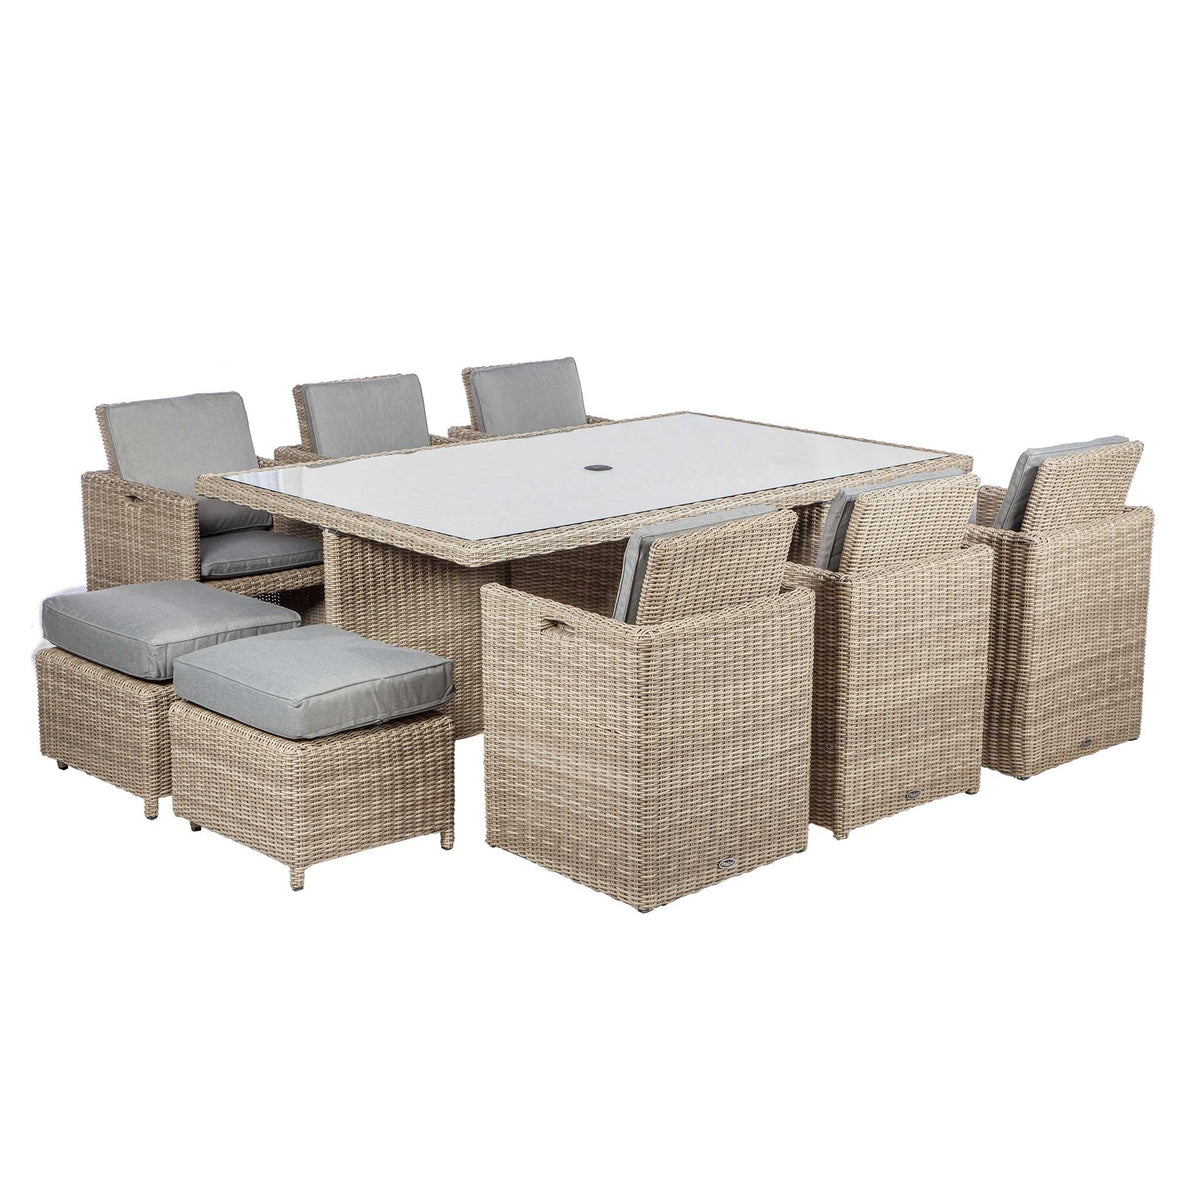 Wentworth 10 Seater Rattan Cube Outdoor Dining Set